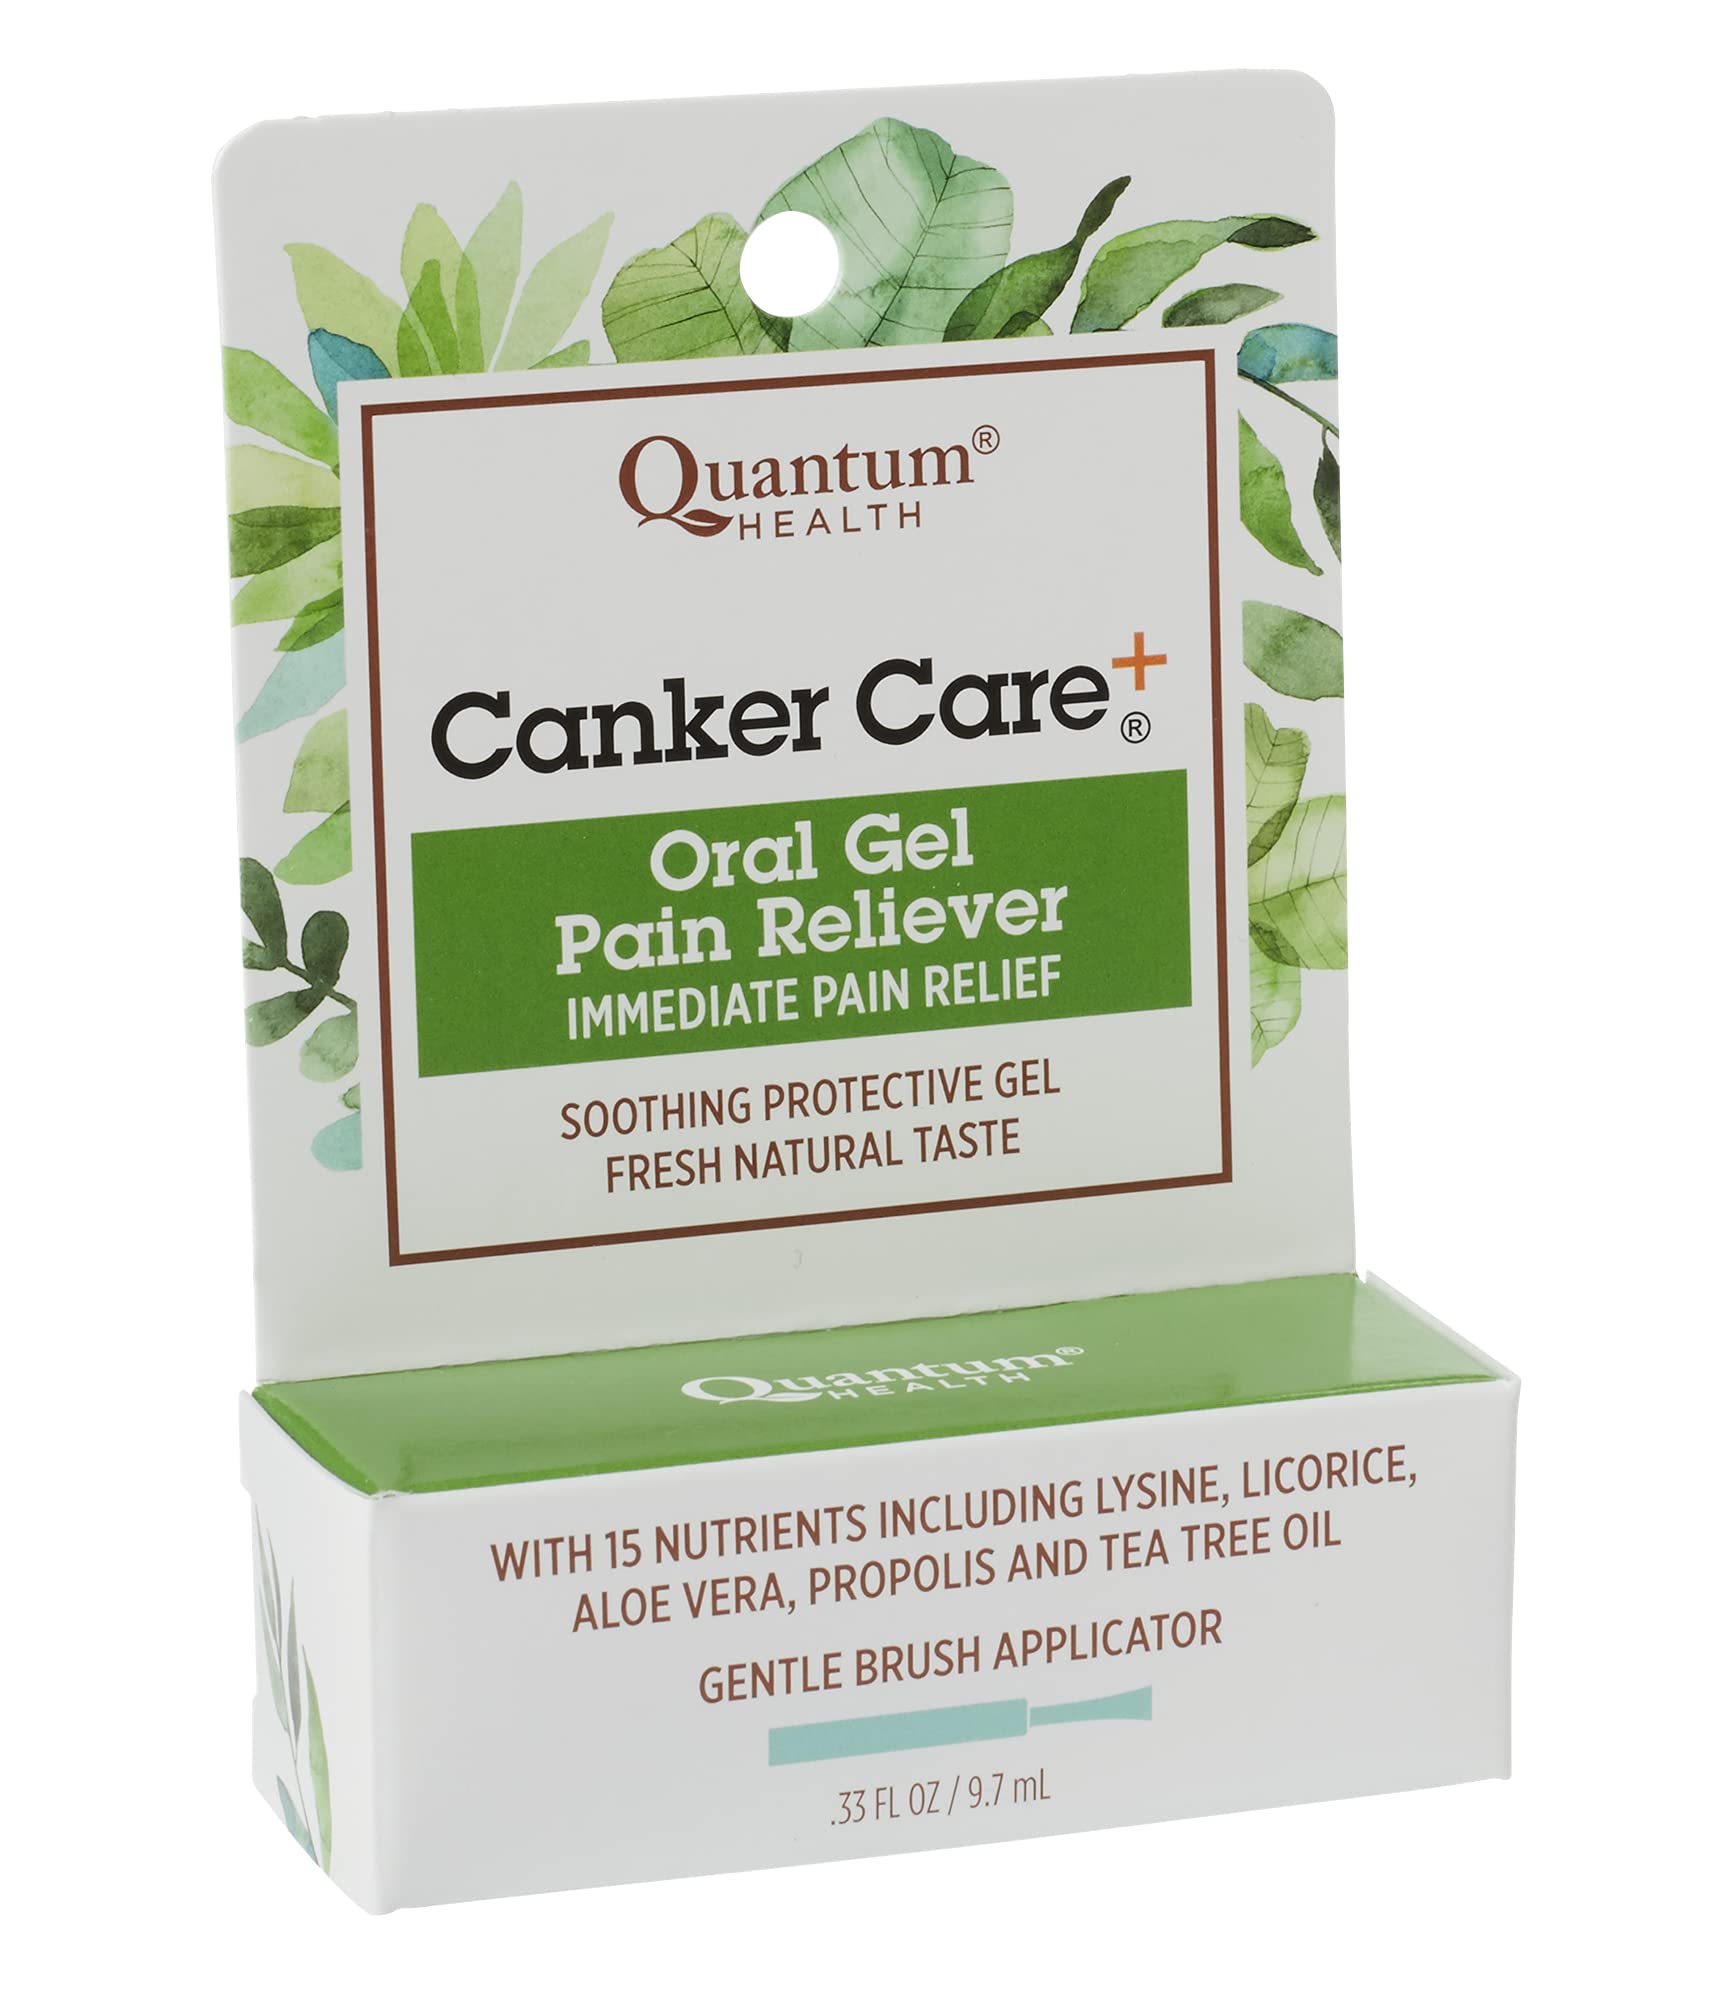 Quantum Health Canker Care+ Oral Gel Pain Reliever|Provides Immediate Pain Relief|Soothing Protective Gel|Fresh Natural Taste|Formulated with 15 Nutrients|0.33 Ounce